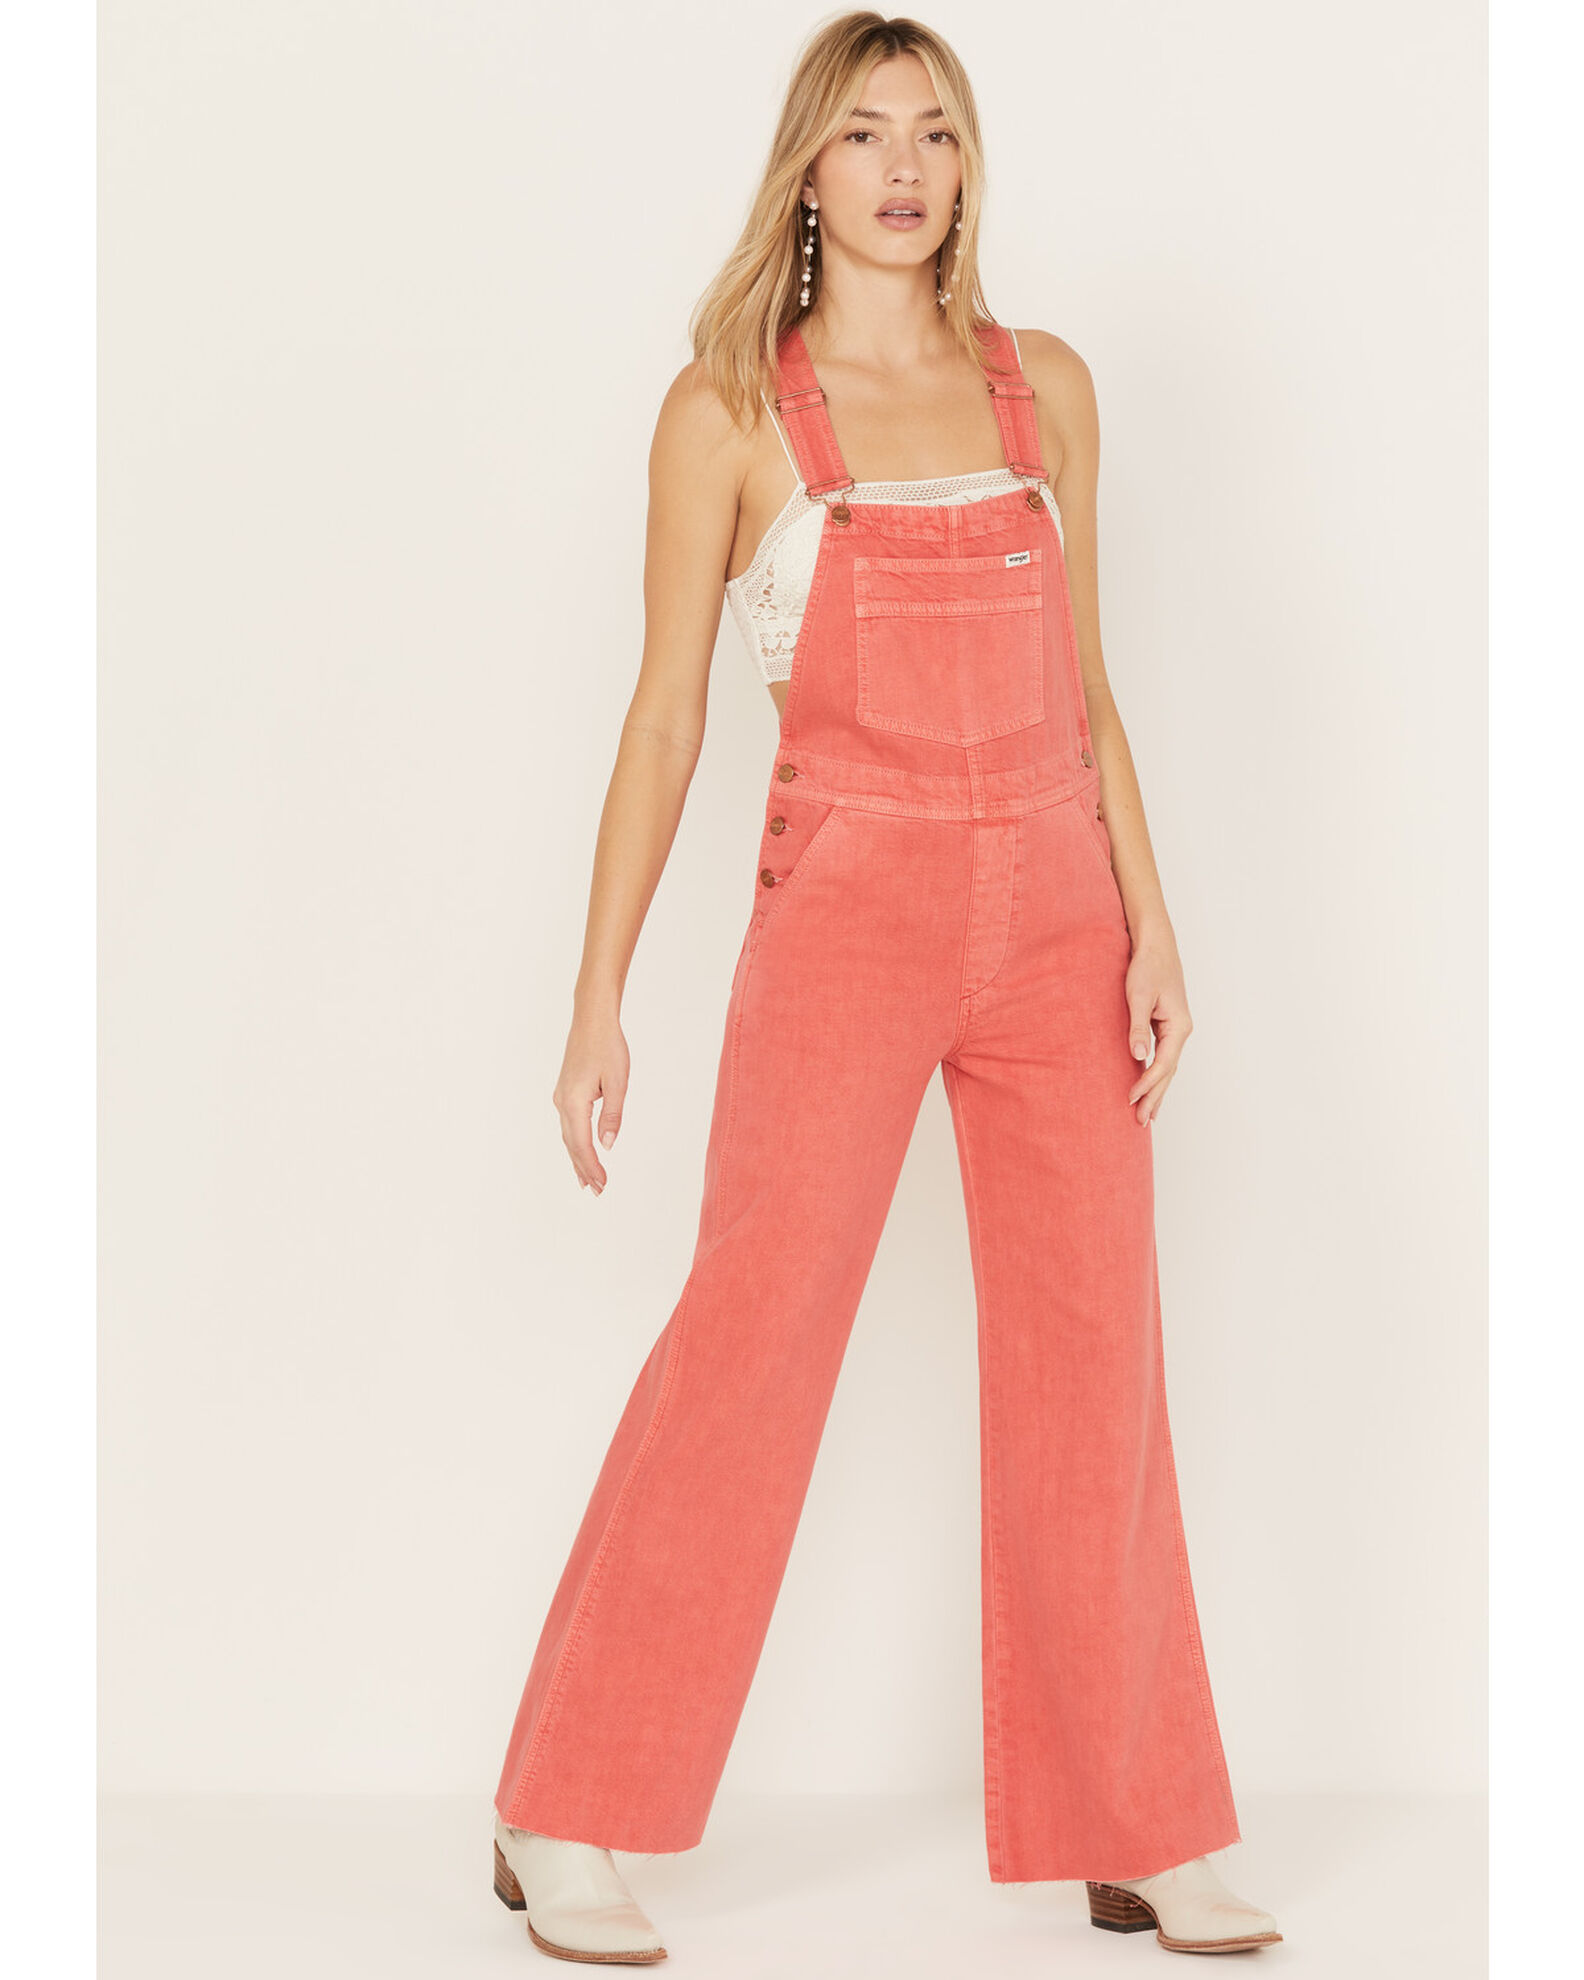 Wrangler Women's Flare Overalls - Country Outfitter